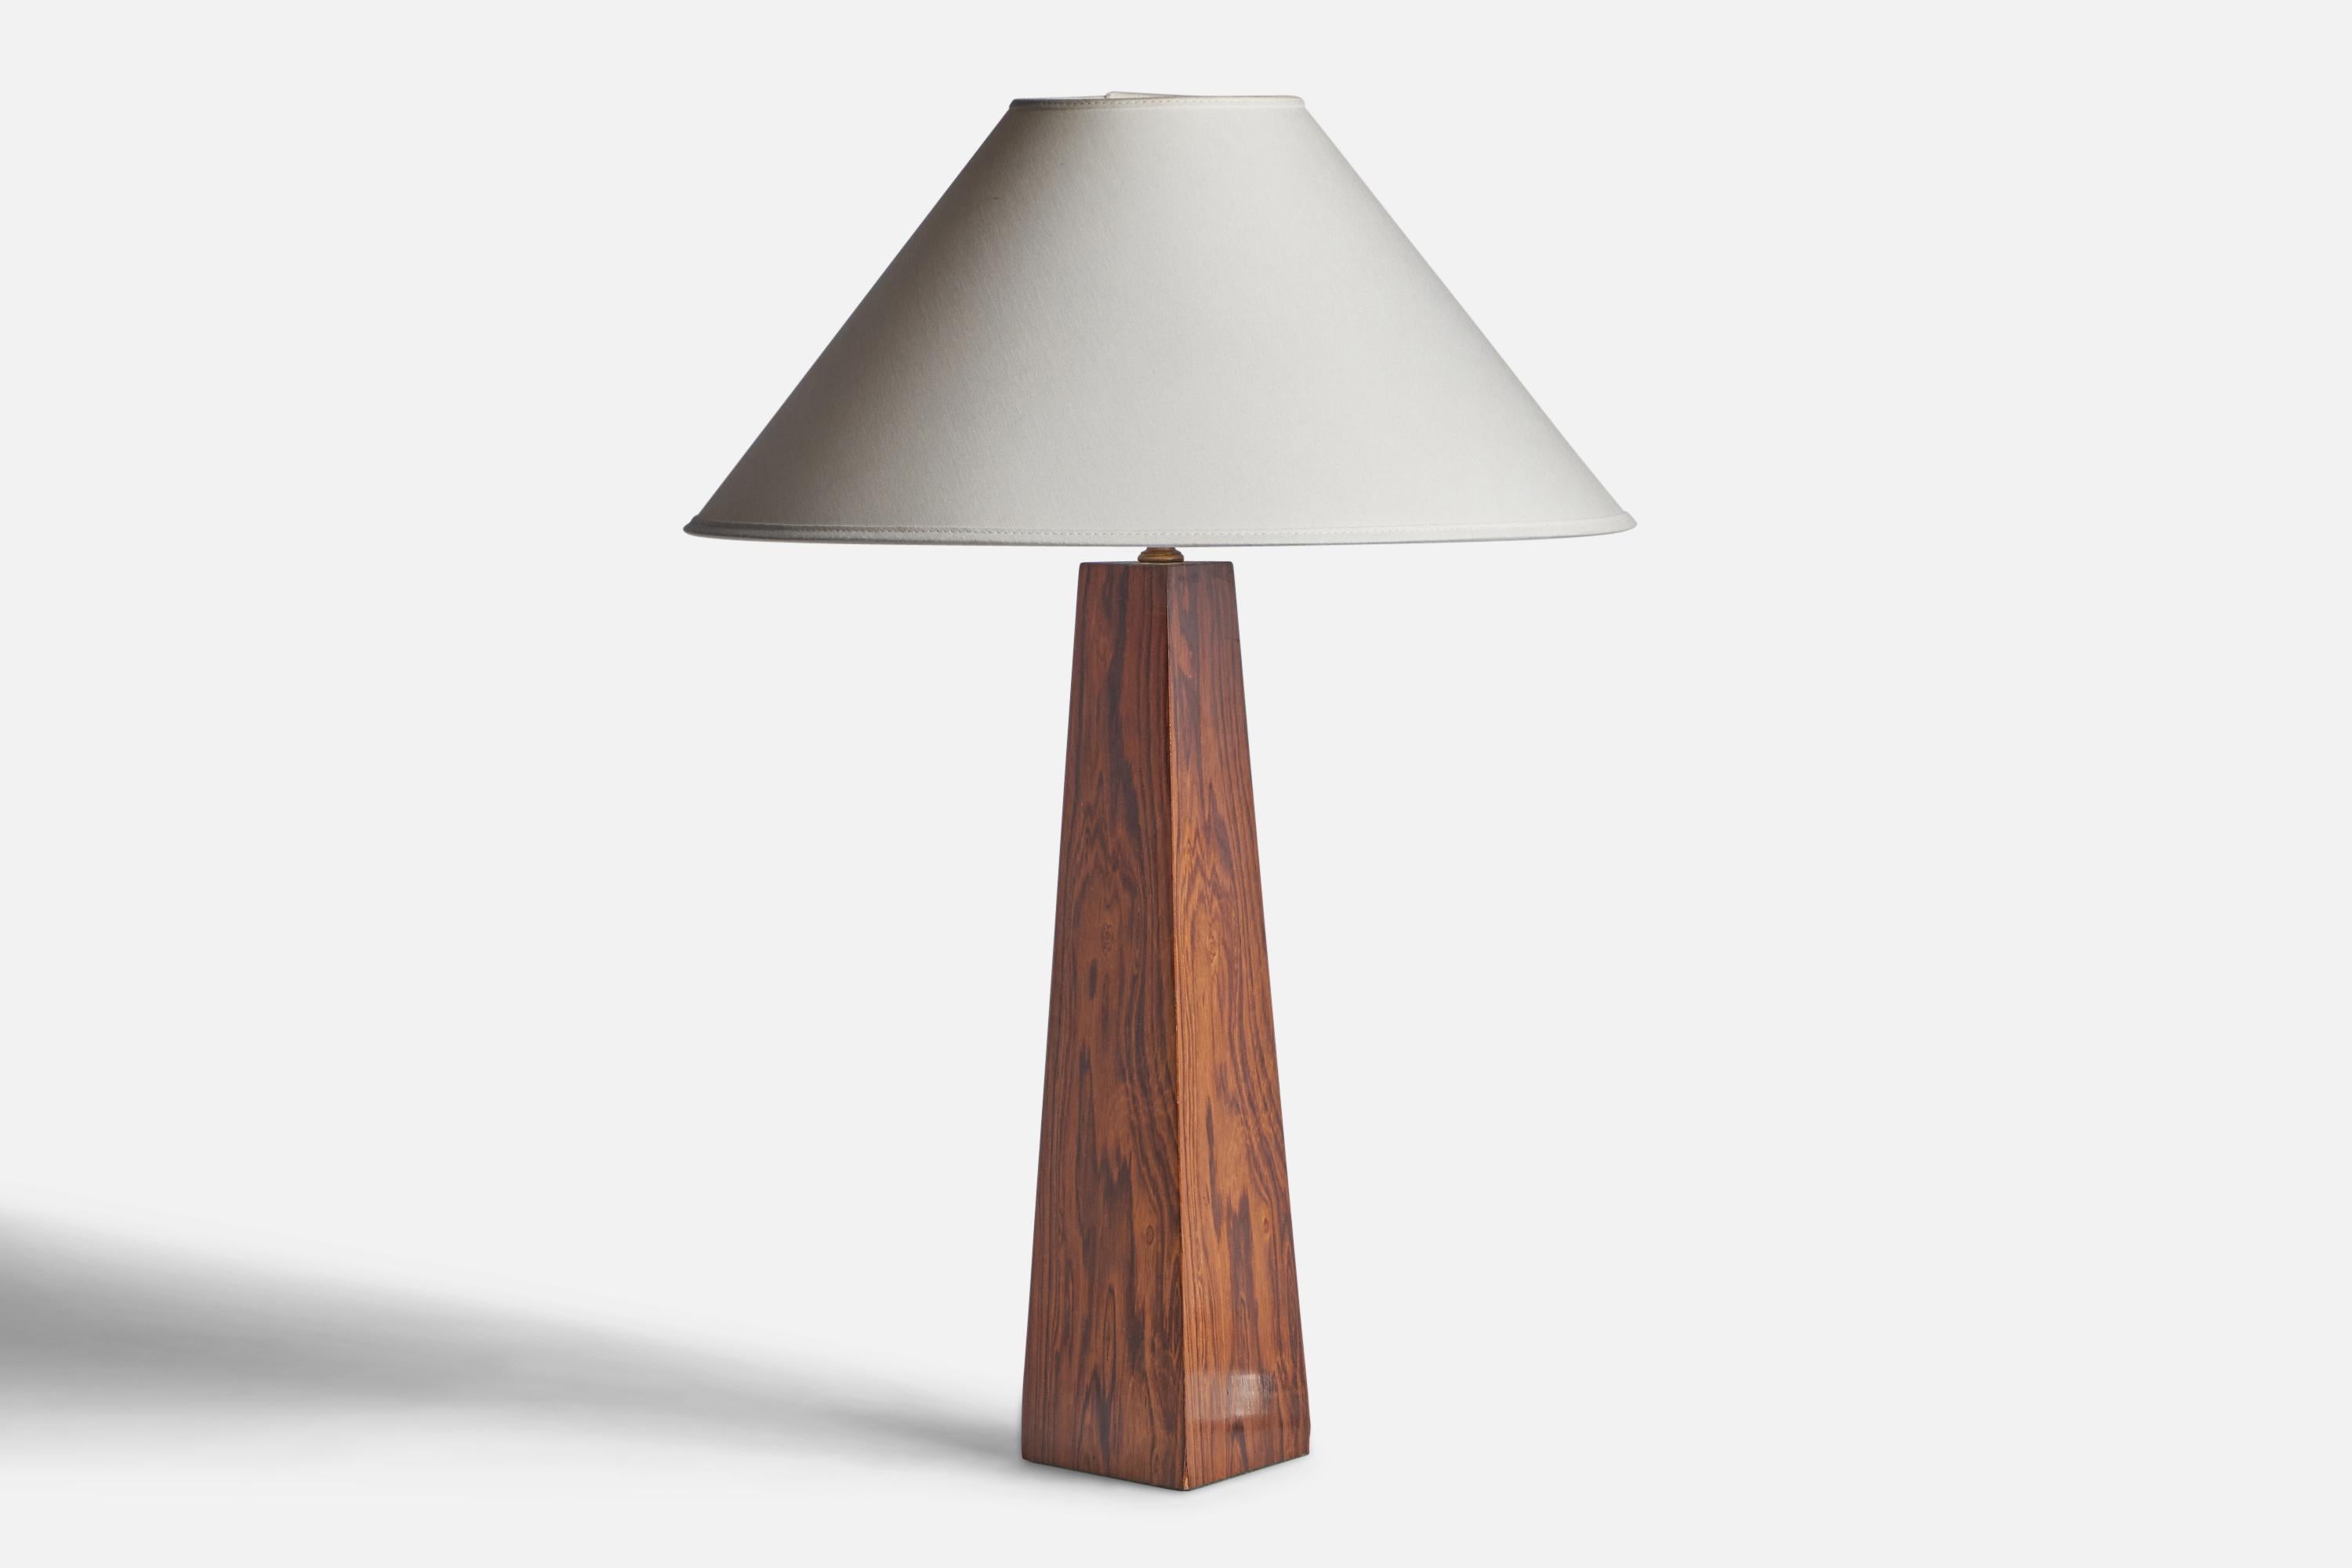 A rosewood veneered table lamp designed and produced in Sweden, c. 1950s.

Dimensions of Lamp (inches): 17.85” H x 6.3” Diameter
Dimensions of Shade (inches): 4.5” Top Diameter x 16” Bottom Diameter x 7.25” H
Dimensions of Lamp with Shade (inches):